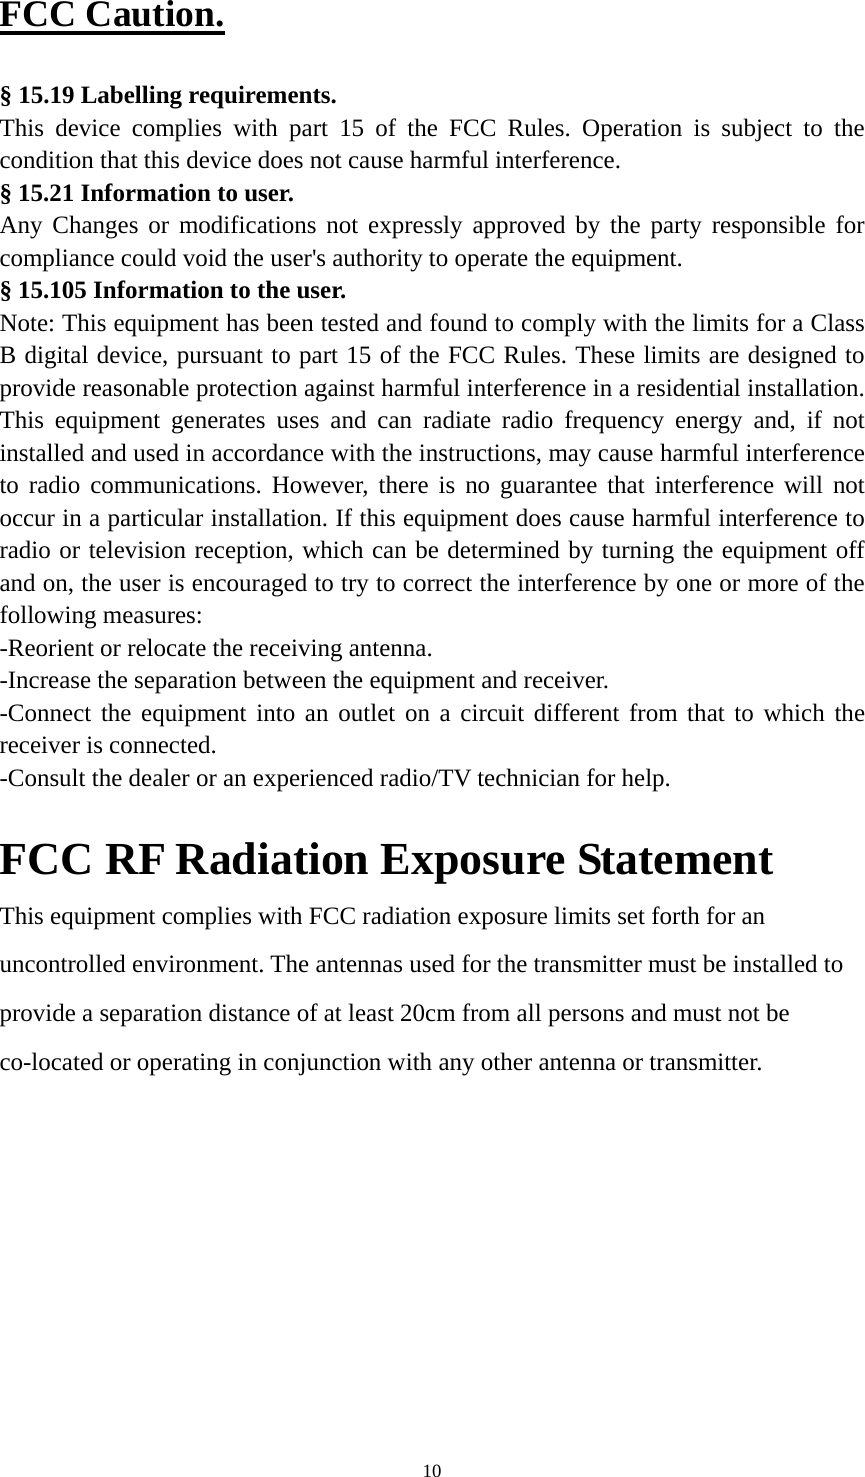  10FCC Caution.  § 15.19 Labelling requirements. This device complies with part 15 of the FCC Rules. Operation is subject to the condition that this device does not cause harmful interference. § 15.21 Information to user. Any Changes or modifications not expressly approved by the party responsible for compliance could void the user&apos;s authority to operate the equipment. § 15.105 Information to the user. Note: This equipment has been tested and found to comply with the limits for a Class B digital device, pursuant to part 15 of the FCC Rules. These limits are designed to provide reasonable protection against harmful interference in a residential installation. This equipment generates uses and can radiate radio frequency energy and, if not installed and used in accordance with the instructions, may cause harmful interference to radio communications. However, there is no guarantee that interference will not occur in a particular installation. If this equipment does cause harmful interference to radio or television reception, which can be determined by turning the equipment off and on, the user is encouraged to try to correct the interference by one or more of the following measures: -Reorient or relocate the receiving antenna. -Increase the separation between the equipment and receiver. -Connect the equipment into an outlet on a circuit different from that to which the receiver is connected. -Consult the dealer or an experienced radio/TV technician for help.    FCC RF Radiation Exposure Statement This equipment complies with FCC radiation exposure limits set forth for an uncontrolled environment. The antennas used for the transmitter must be installed to provide a separation distance of at least 20cm from all persons and must not be co-located or operating in conjunction with any other antenna or transmitter.  